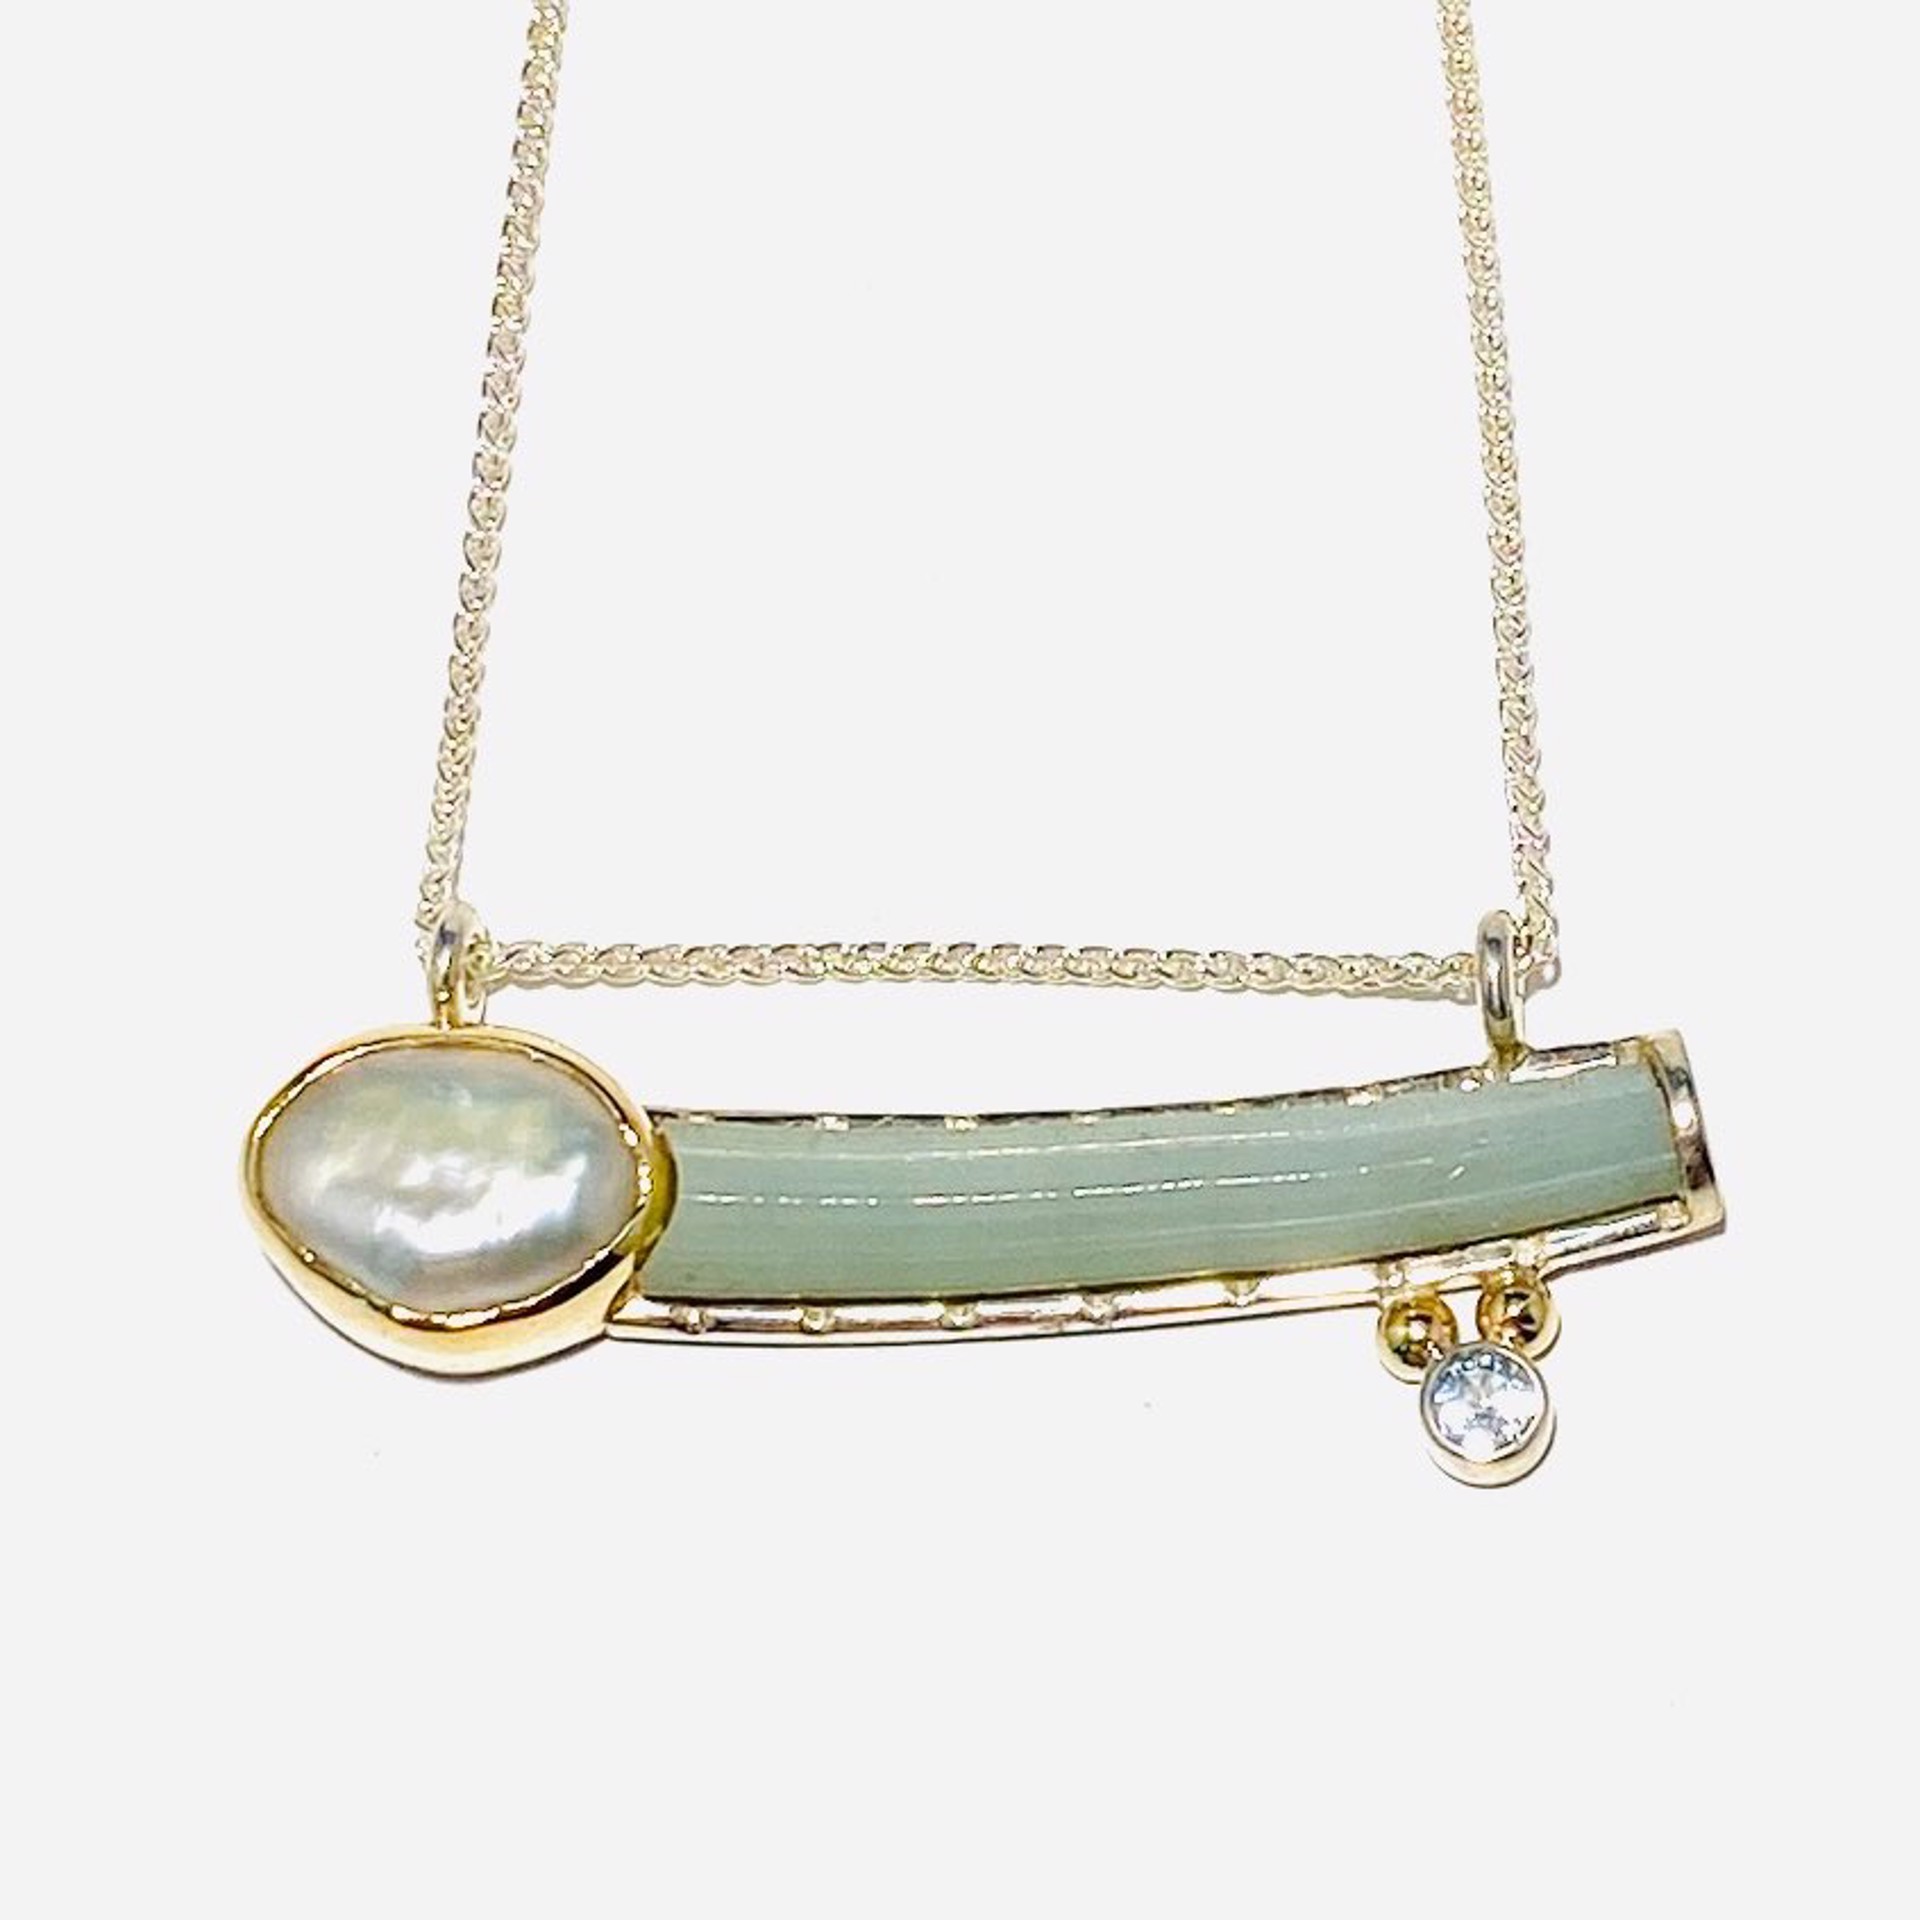 Tusk Shell Mother of Pearl Sky Blue Topaz Pendant on 18" Adjustable Silver Box Chain Necklace by Barbara Umbel